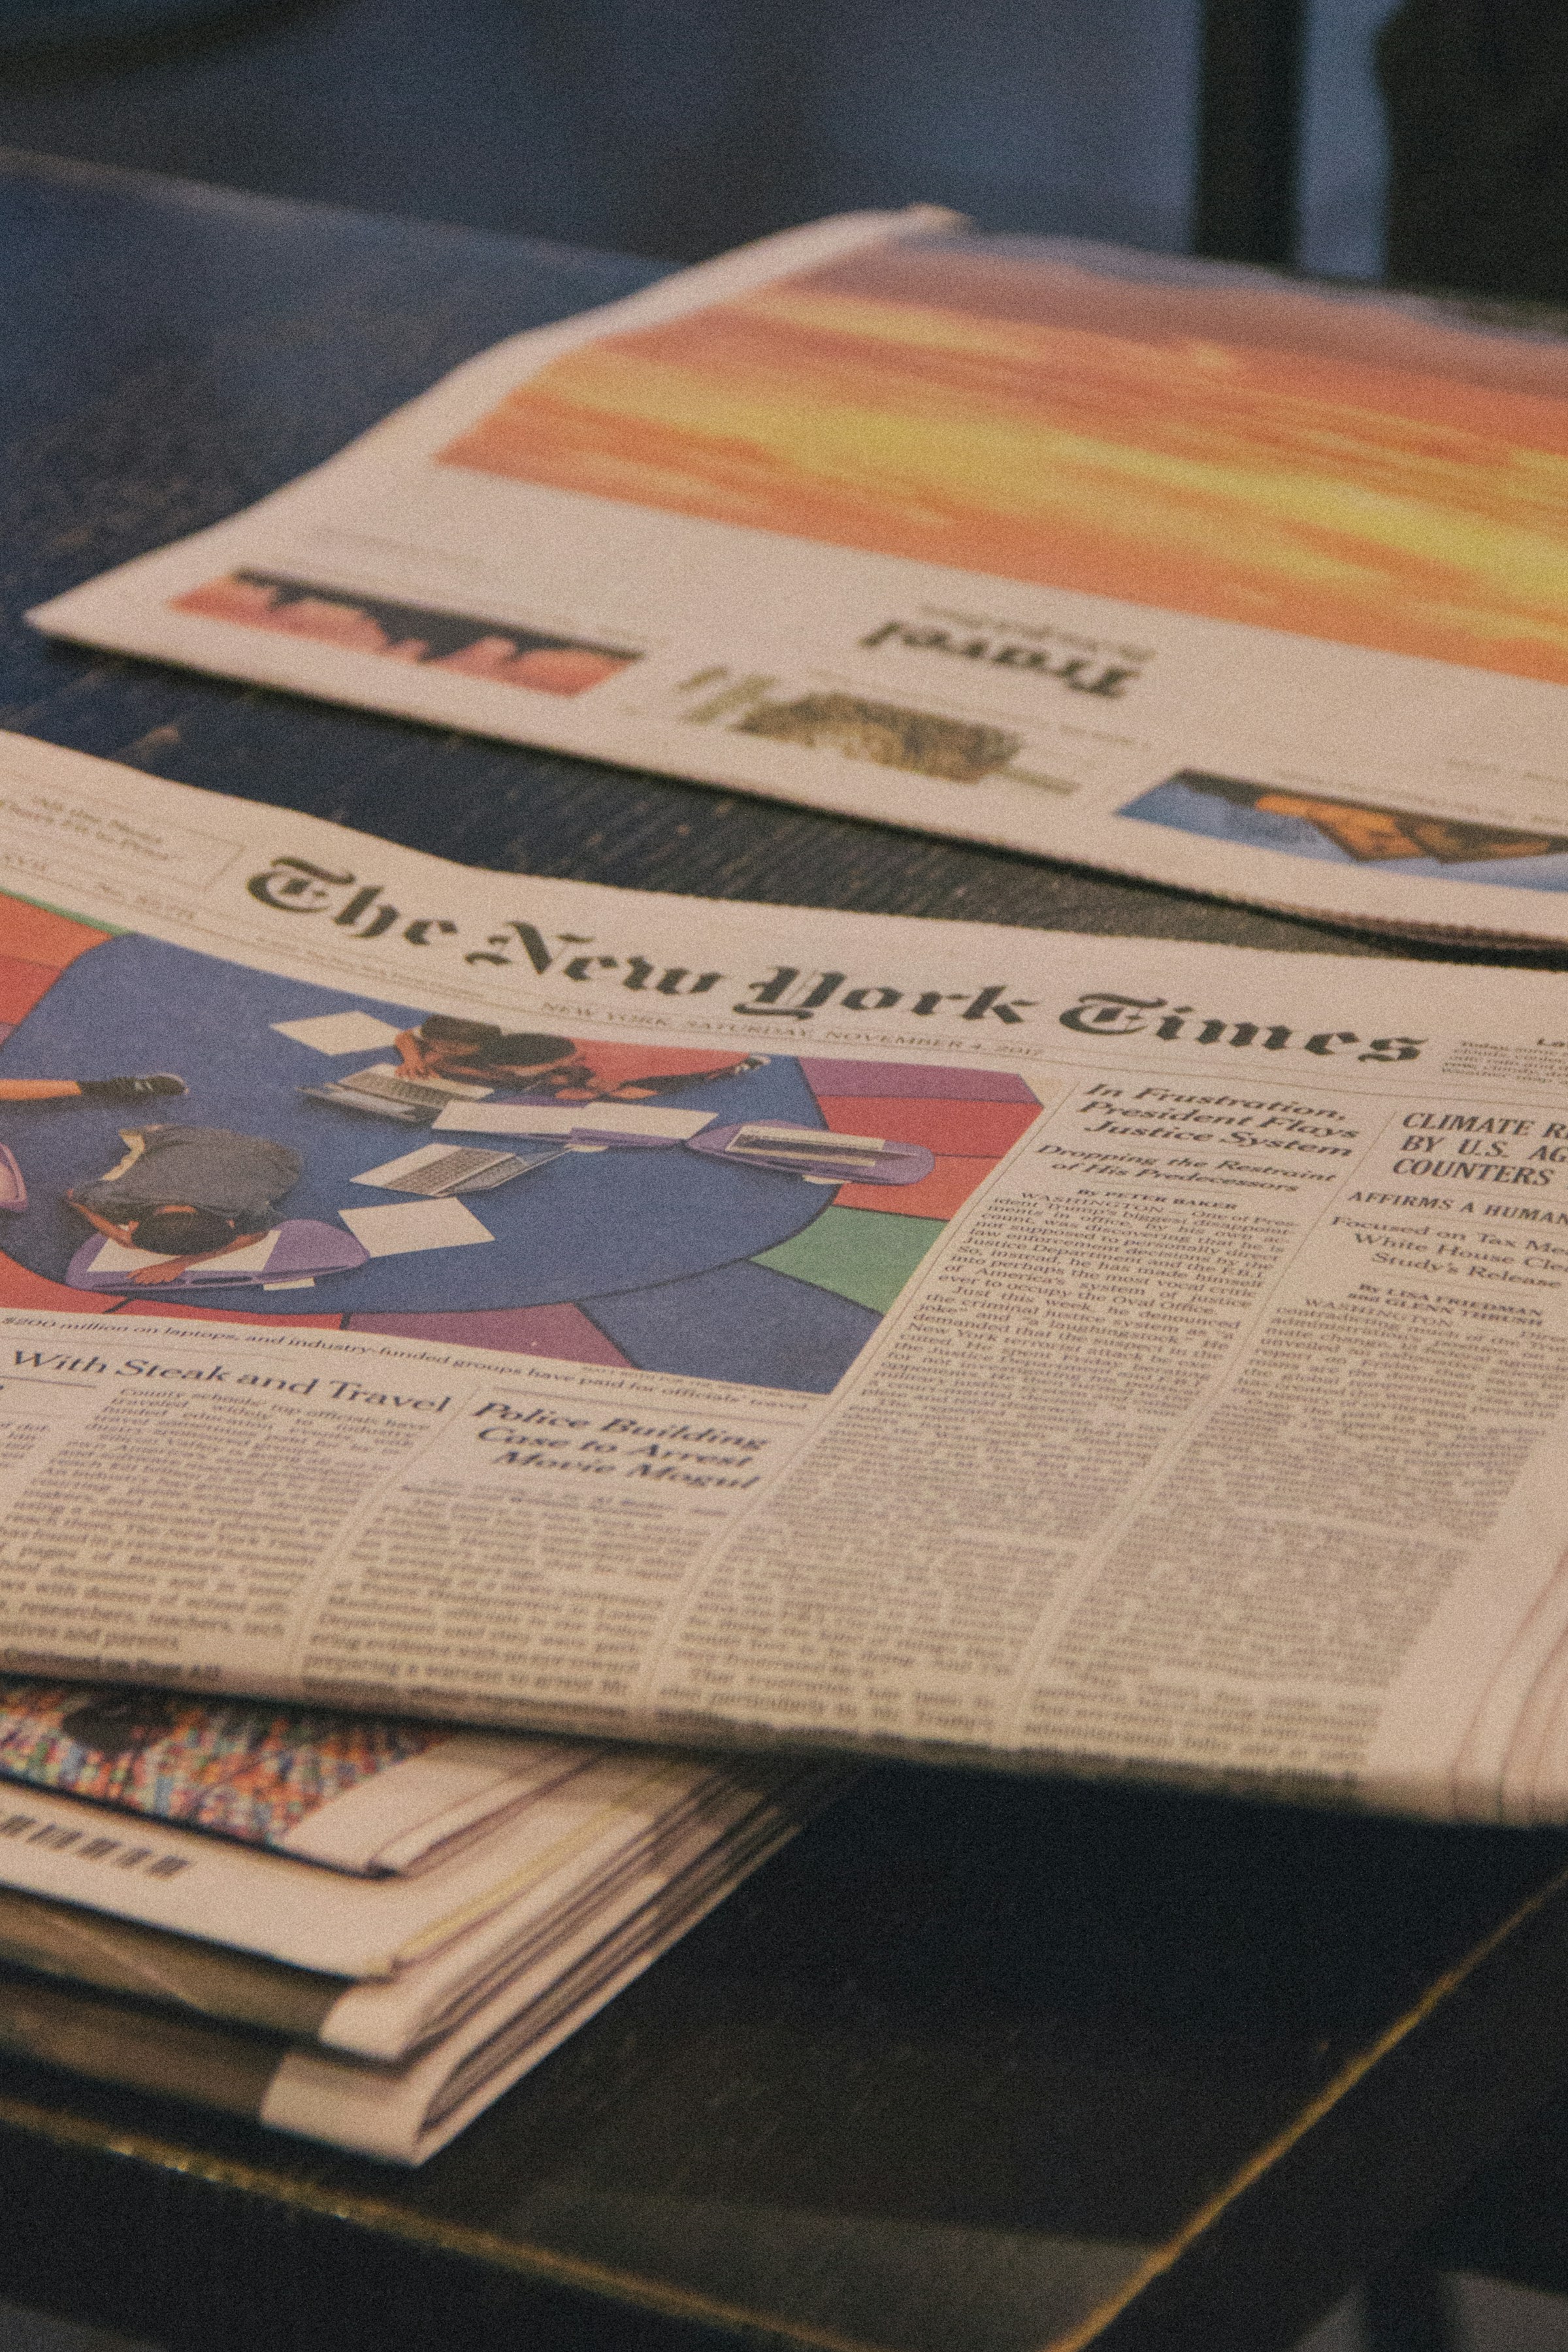 Newspapers lying on a table | Source: Unsplash